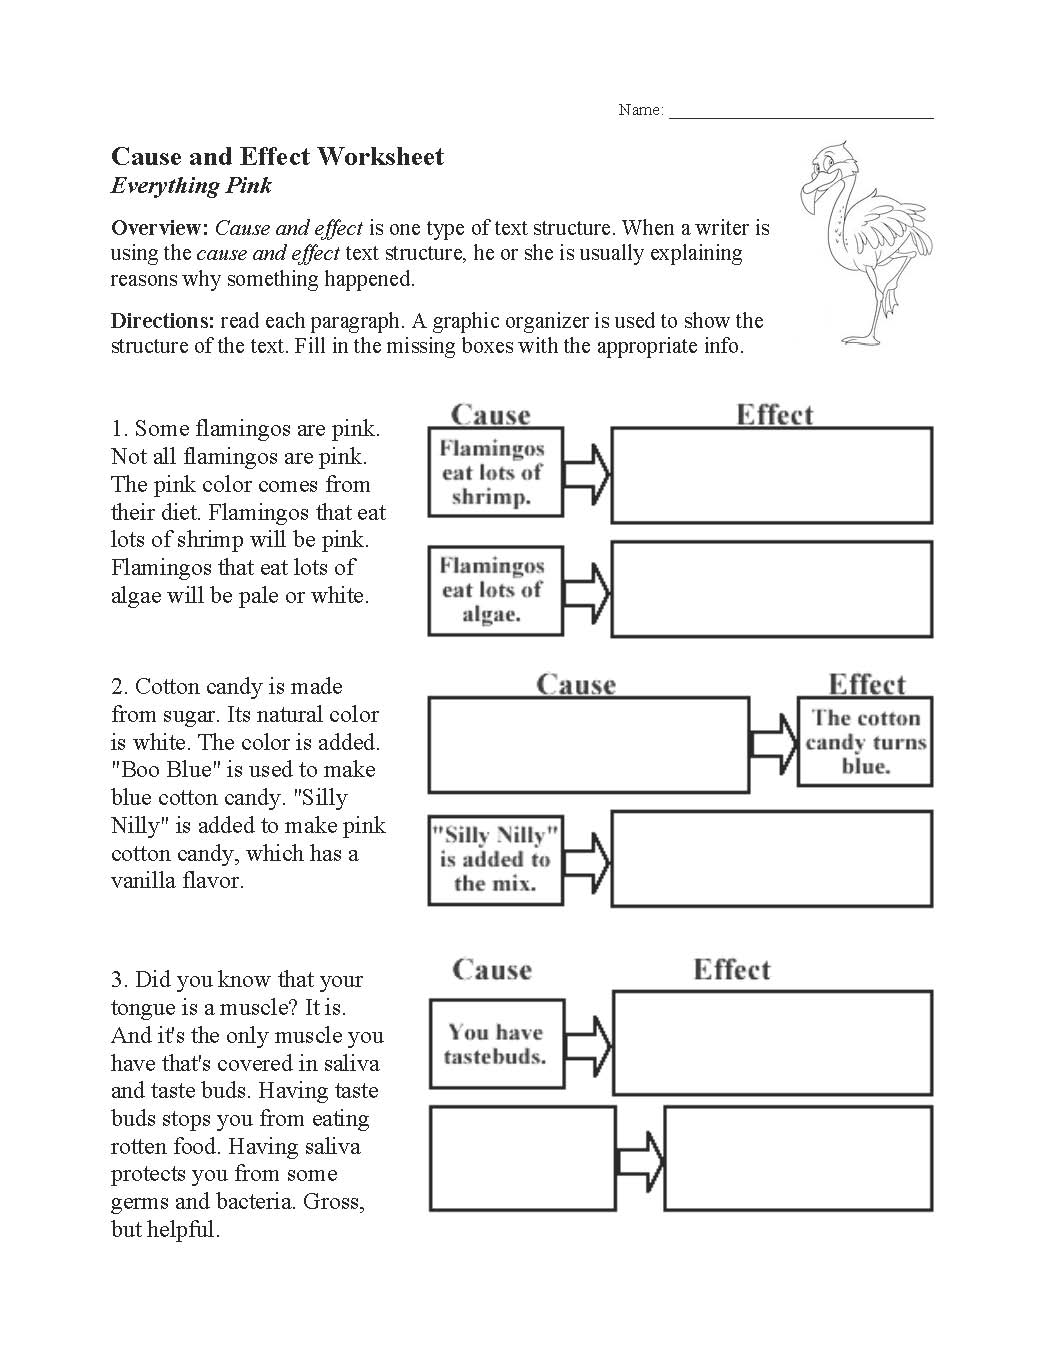 Text Structure Worksheets  Free for Primary Grades Within Text Structure Worksheet 4th Grade